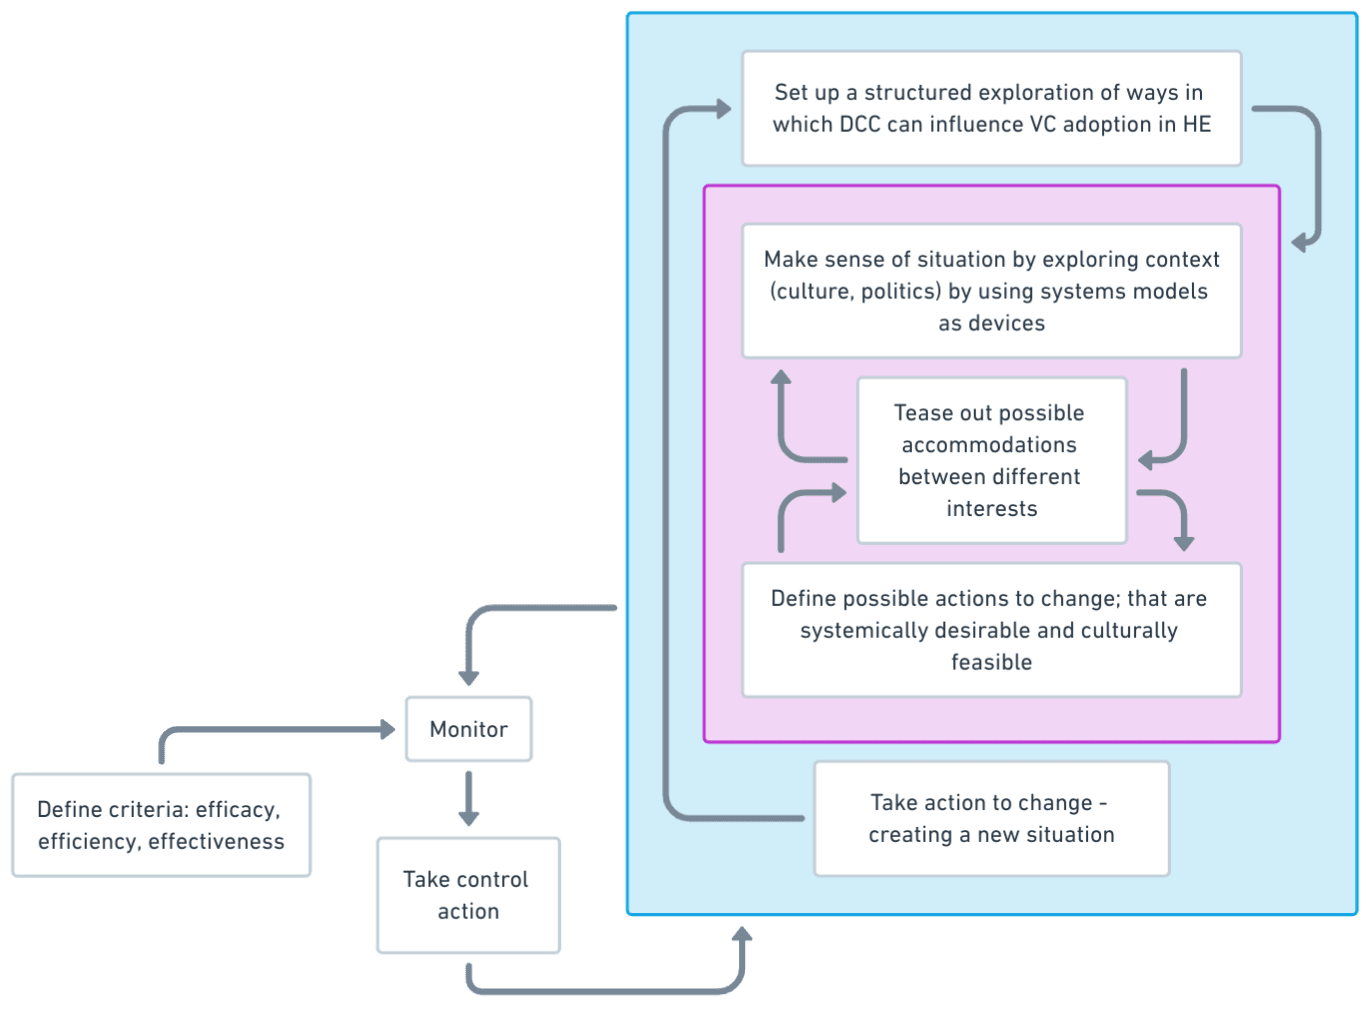 An activity model of a system to conduct a systemic inquiry (my version with 'Set up a structure exploration of ways in which DCC can influence VC adoption in HE' at the top)